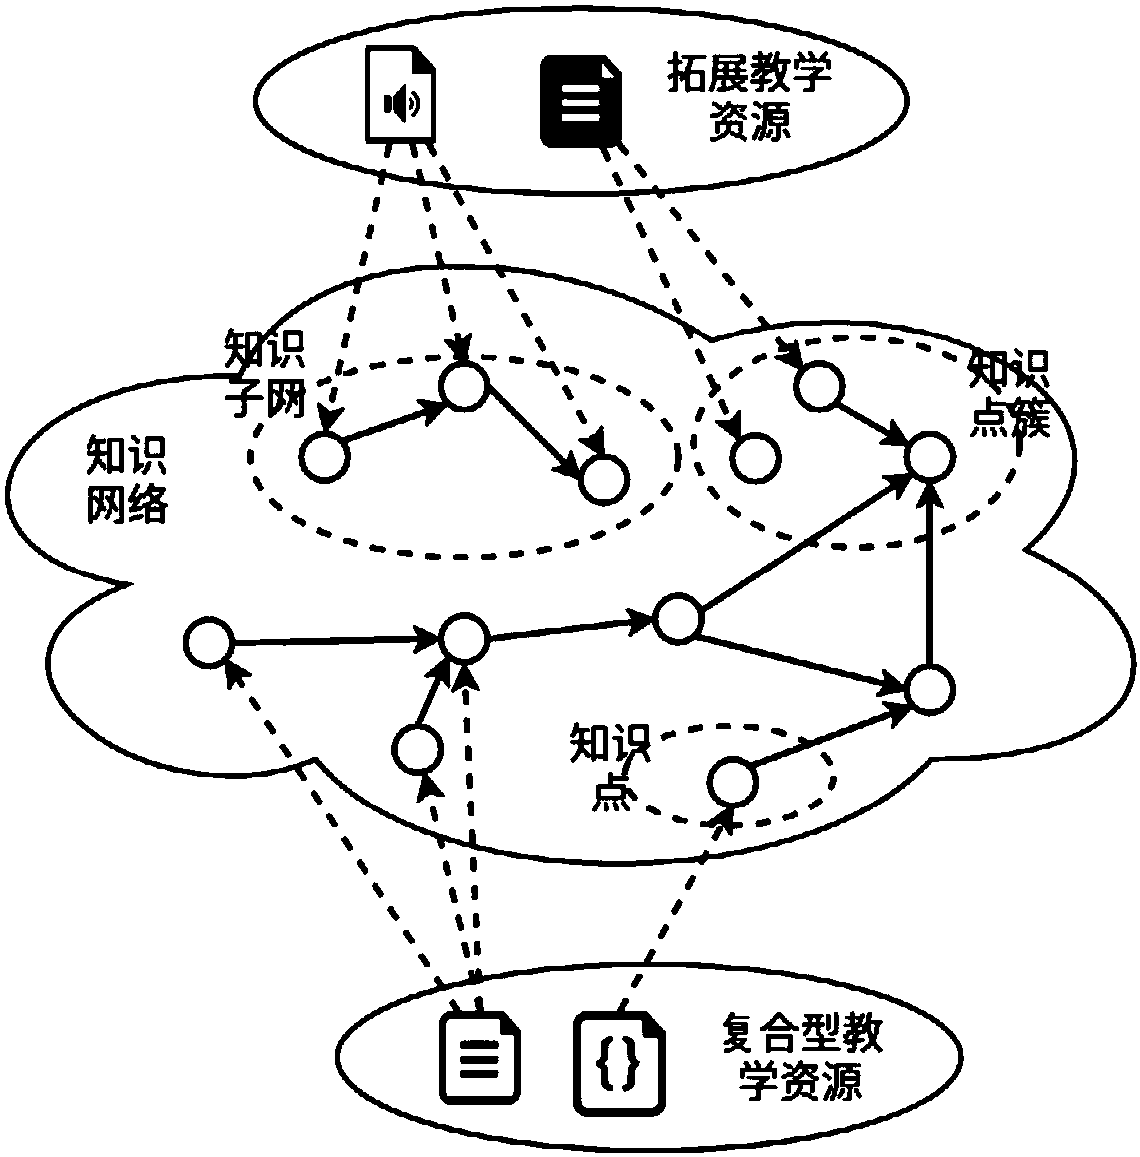 User-centered teaching resource organization and service system based on knowledge network